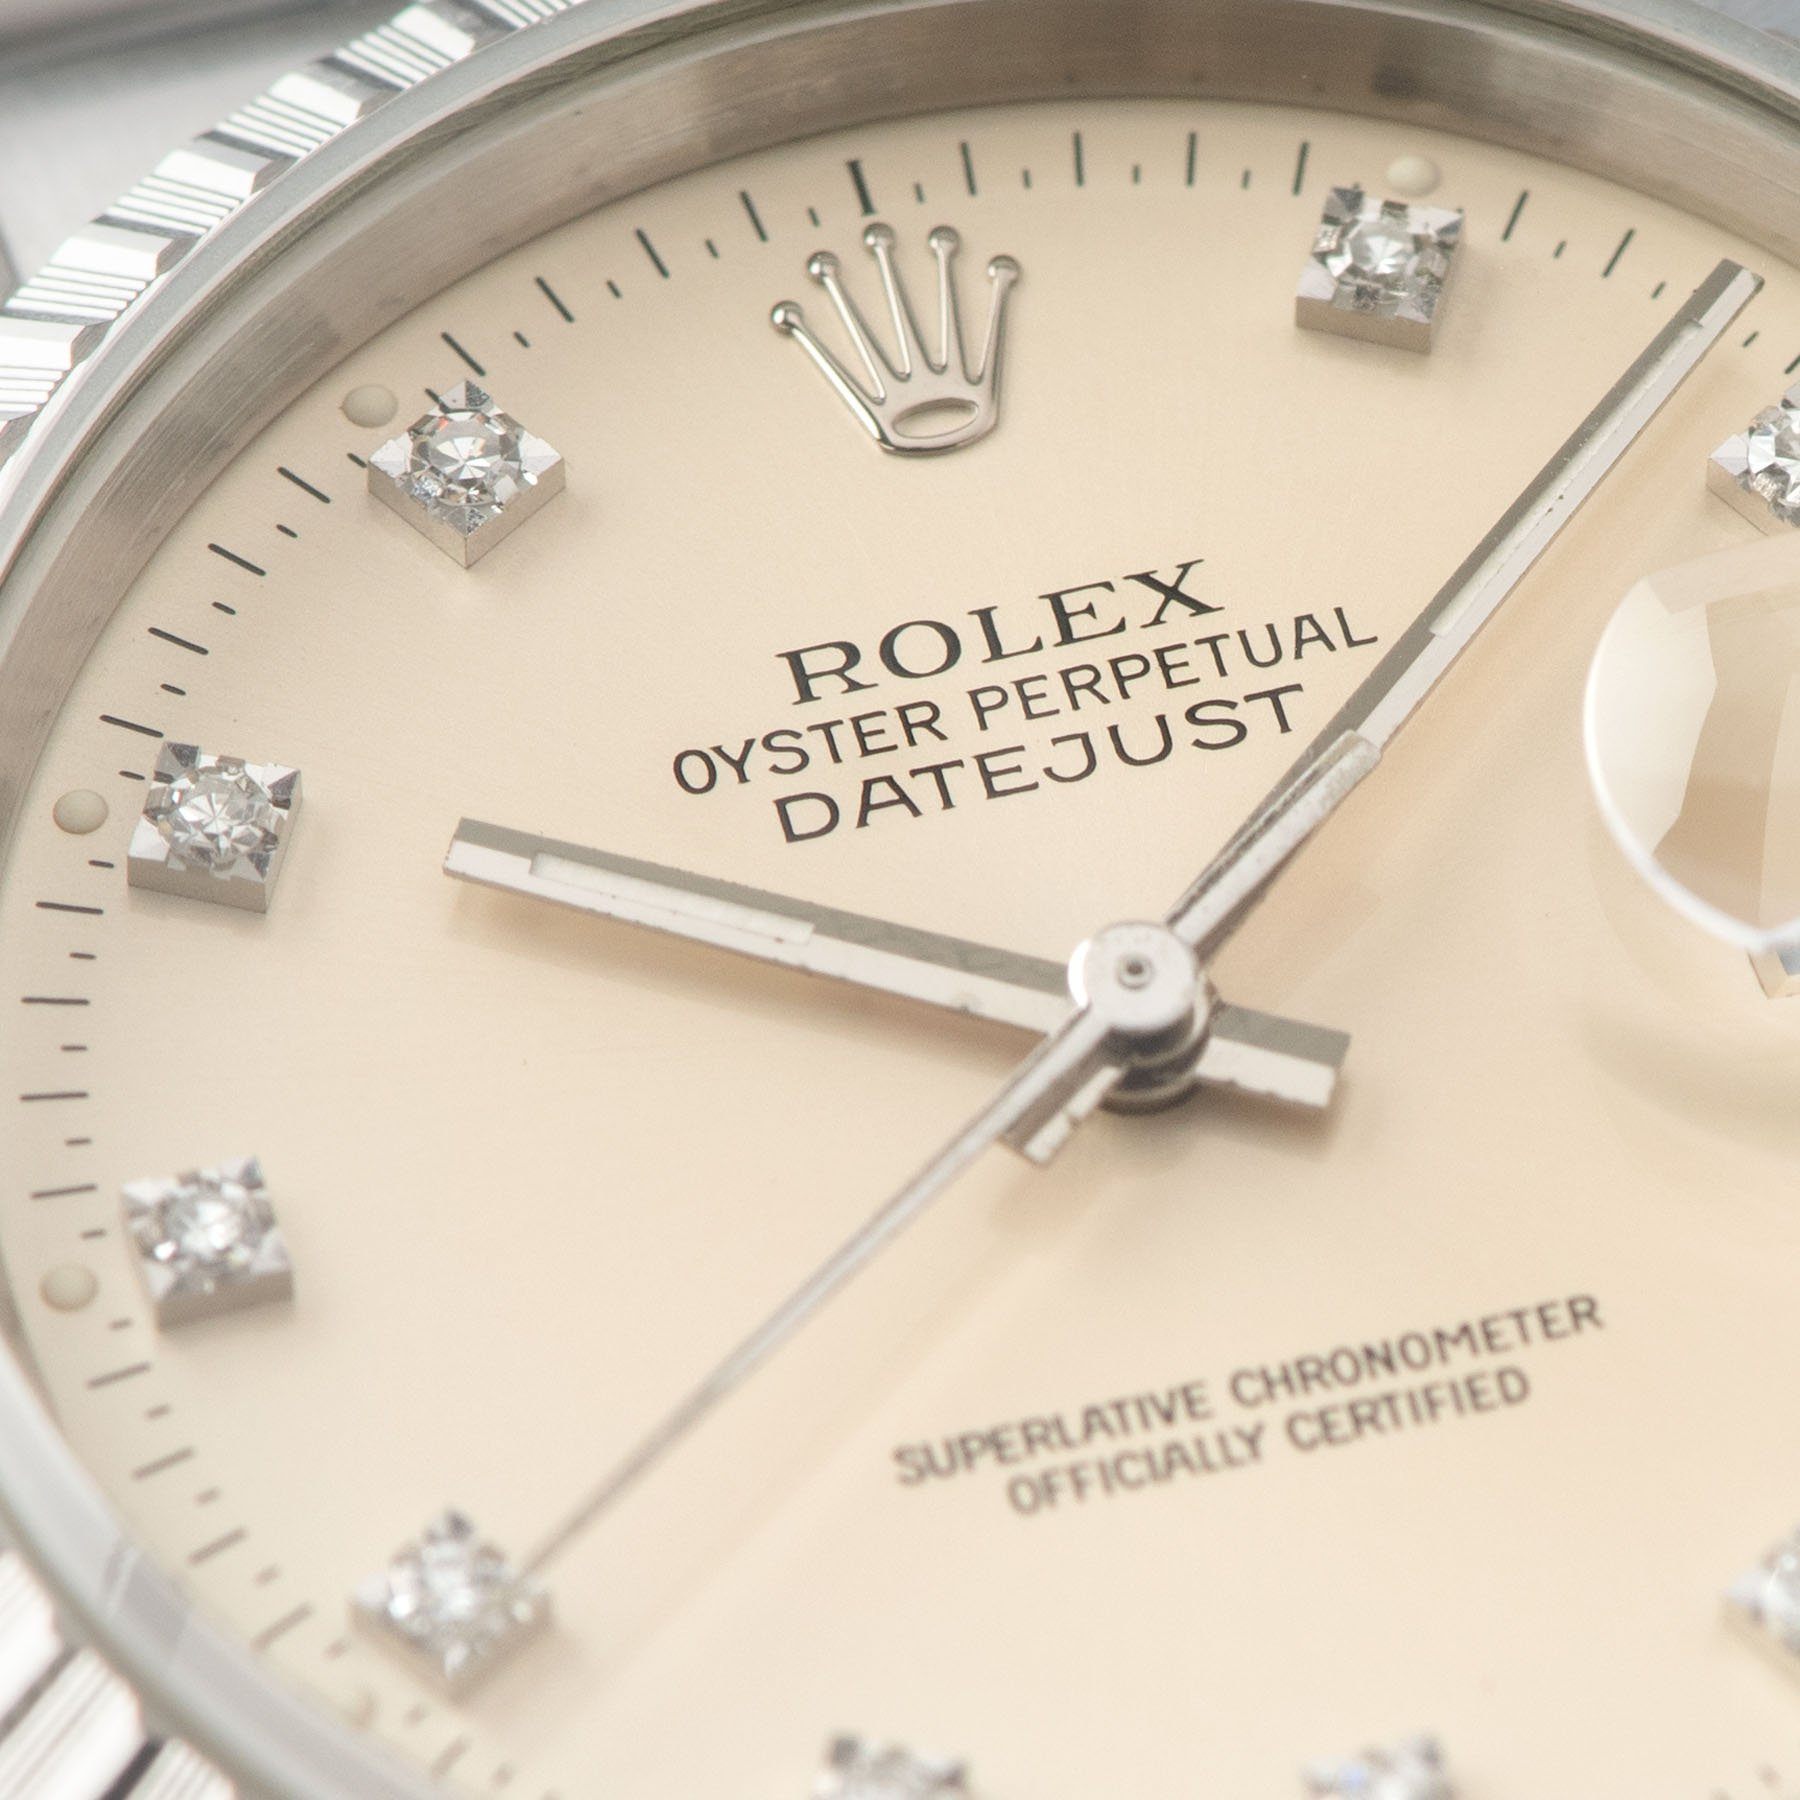 Rolex Datejust Silver Diamond Dial Reference 16220 with og guarantee paper